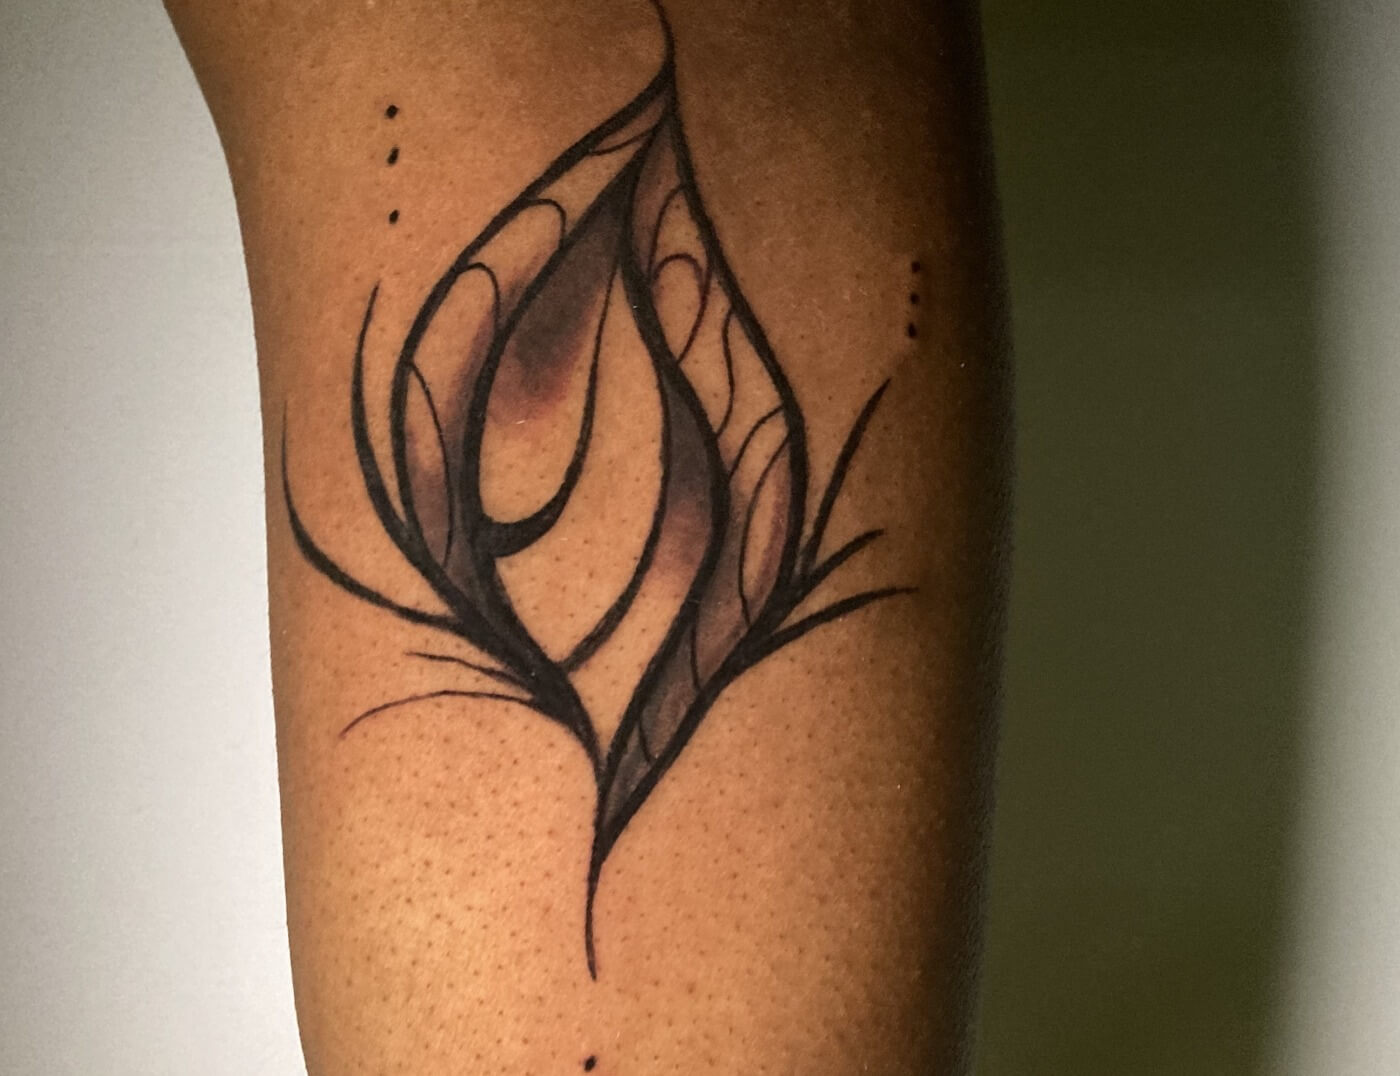 'Budding Seed' Fine Line Minimalist Tattoo By Funk The World At Iron Palm Tattoos In Atlanta, GA. Funk drew this image in his sketchbook to symbolize his growth as an artist. One of his clients, Asyah Payton, decided to purchase the flash and ink it into her life. We're open late night until 2AM. Call 404-973-7828 or stop by for a free consultation with Funk. Walk Ins are welcome.